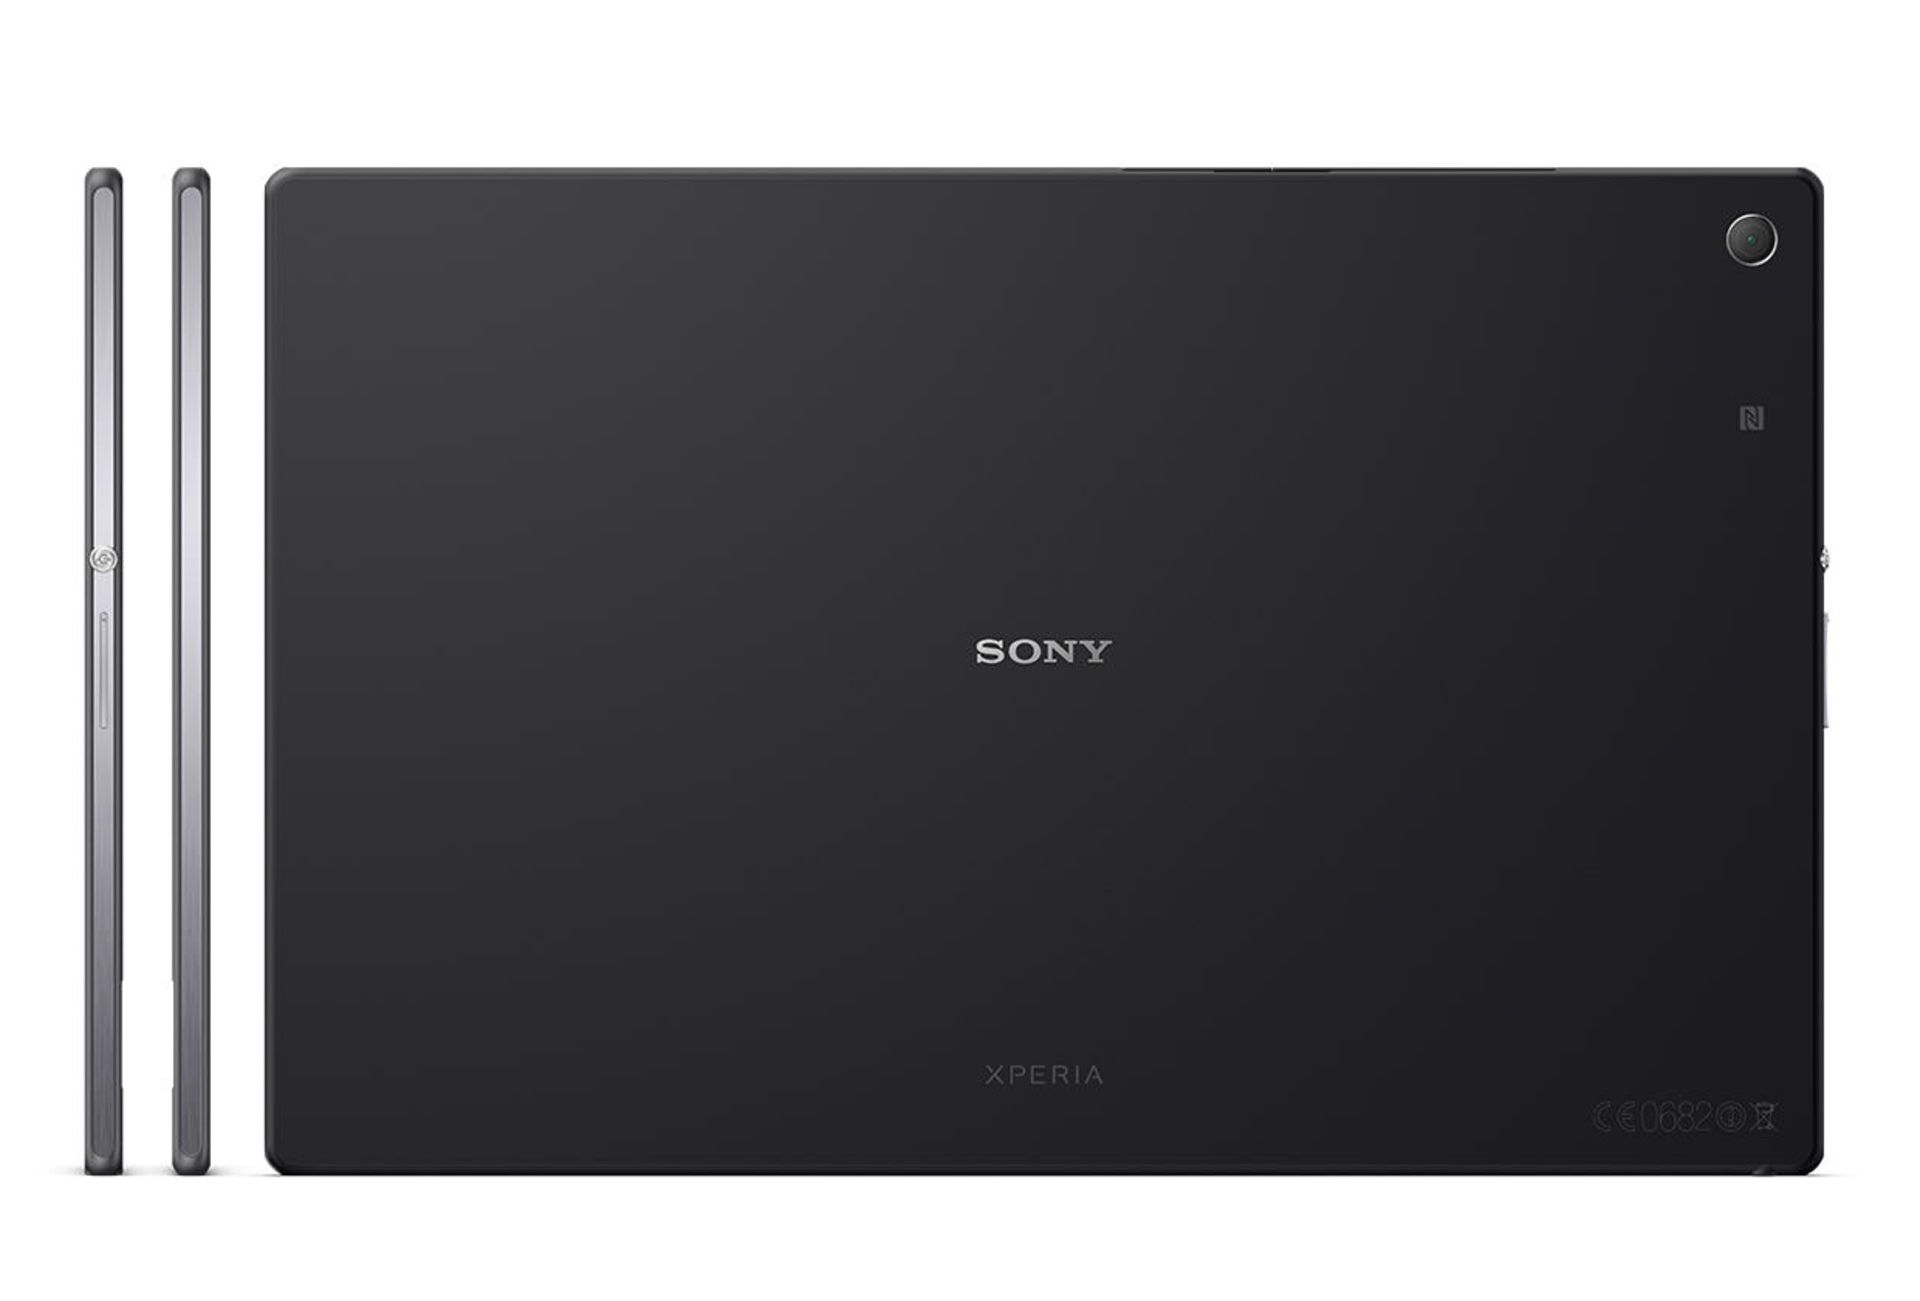 xperia z2 tablet zoomit 02